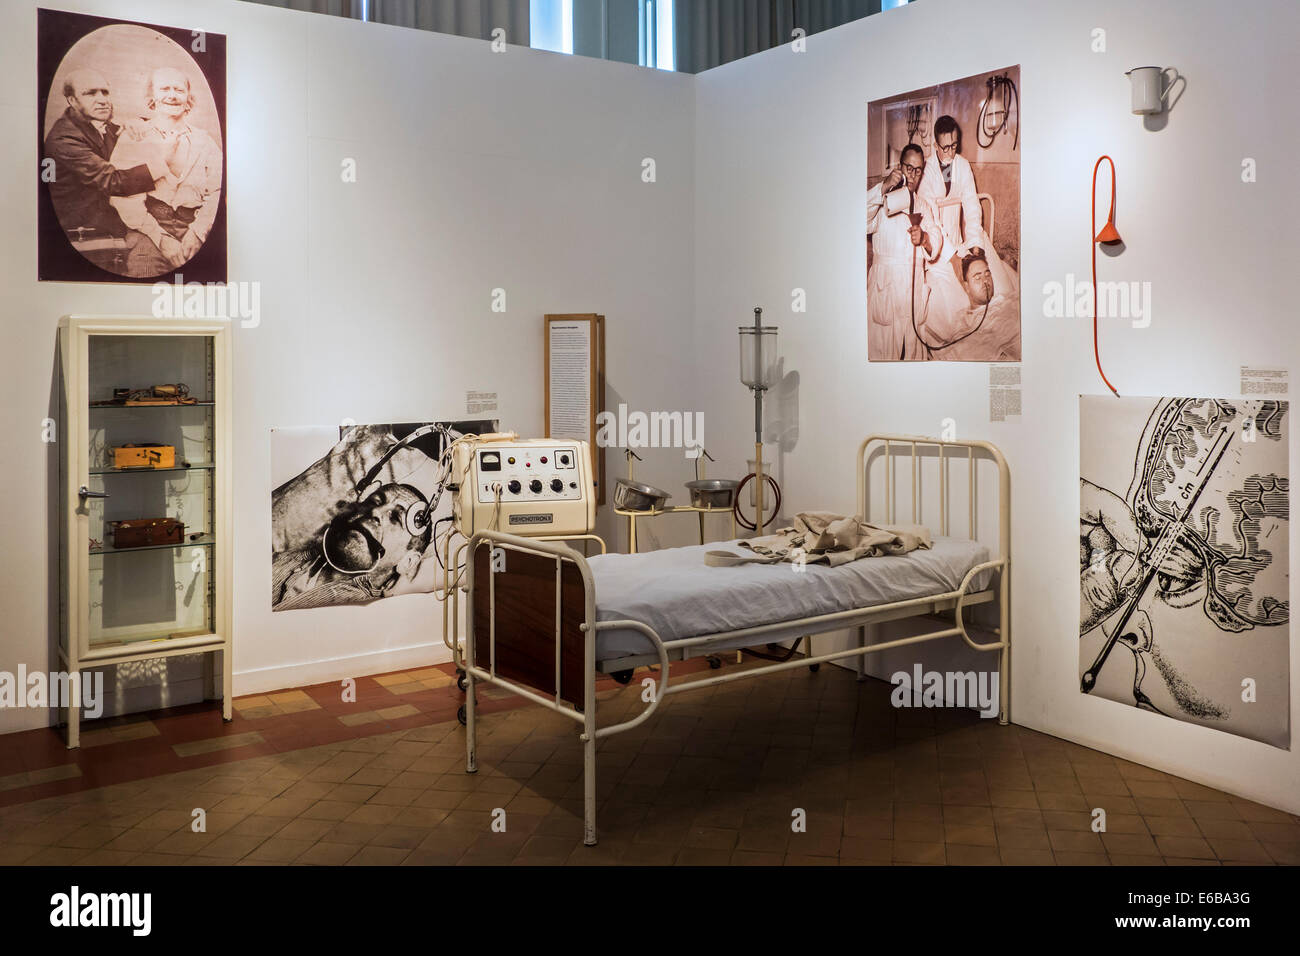 Psychotron II for electroshock therapy / electroconvulsive therapy / ECT, Dr Guislain Museum about psychiatry, Ghent, Belgium Stock Photo